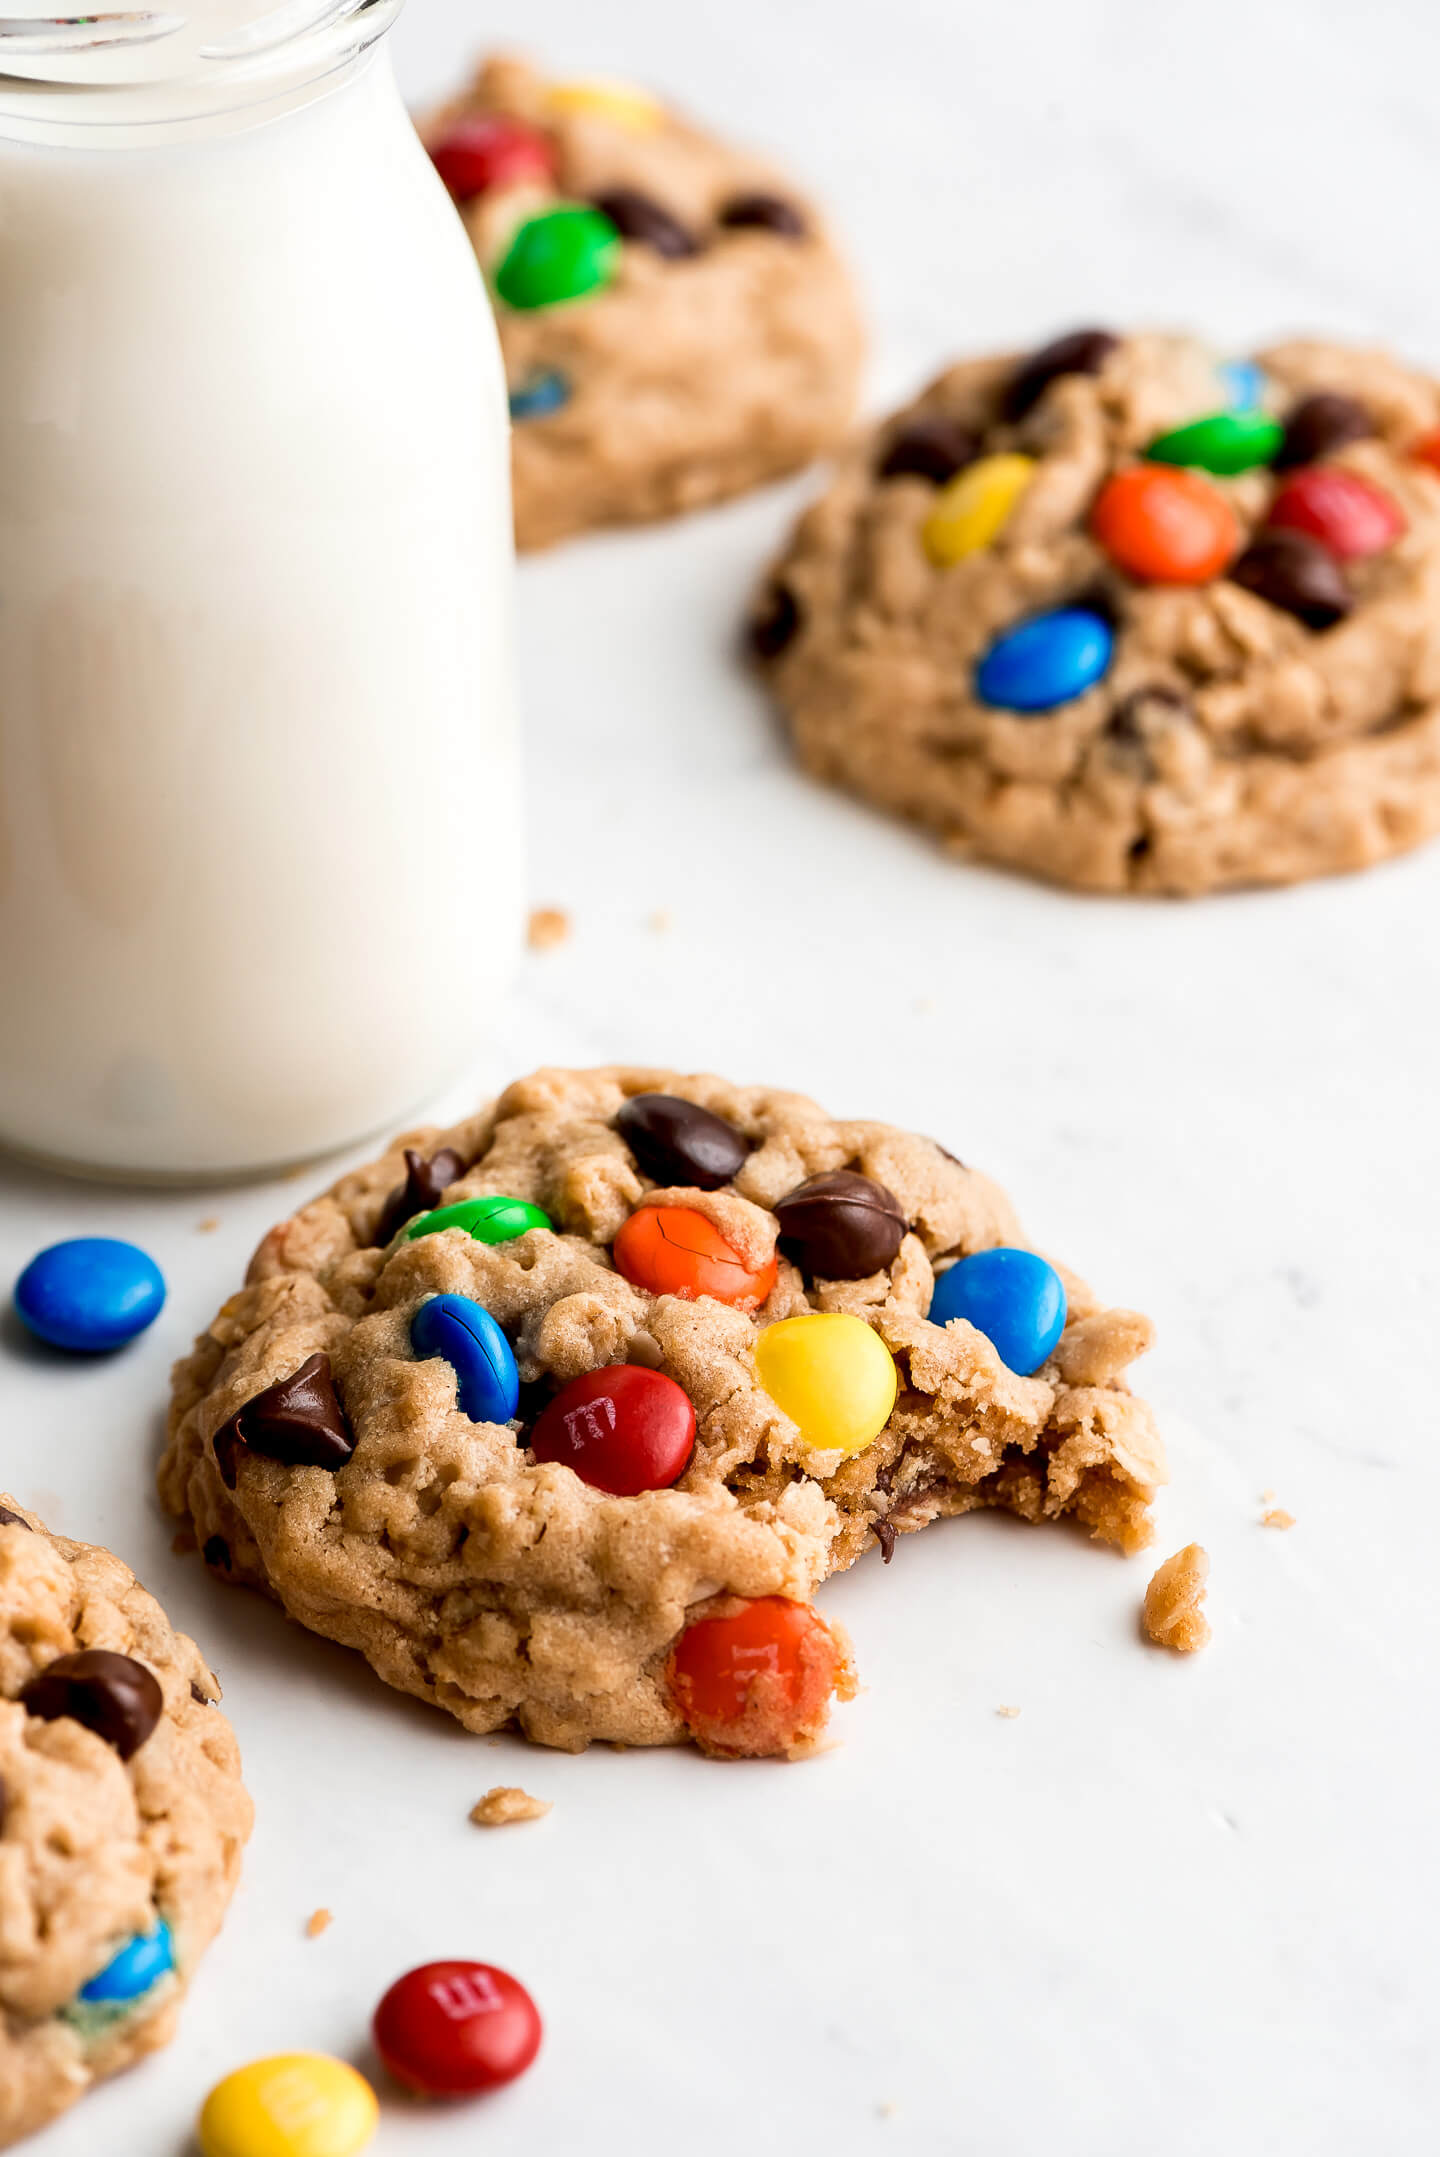 A Monster Cookie with M&M's and Chocolate Chips on top with a bite taken out and a glass of milk on the side.